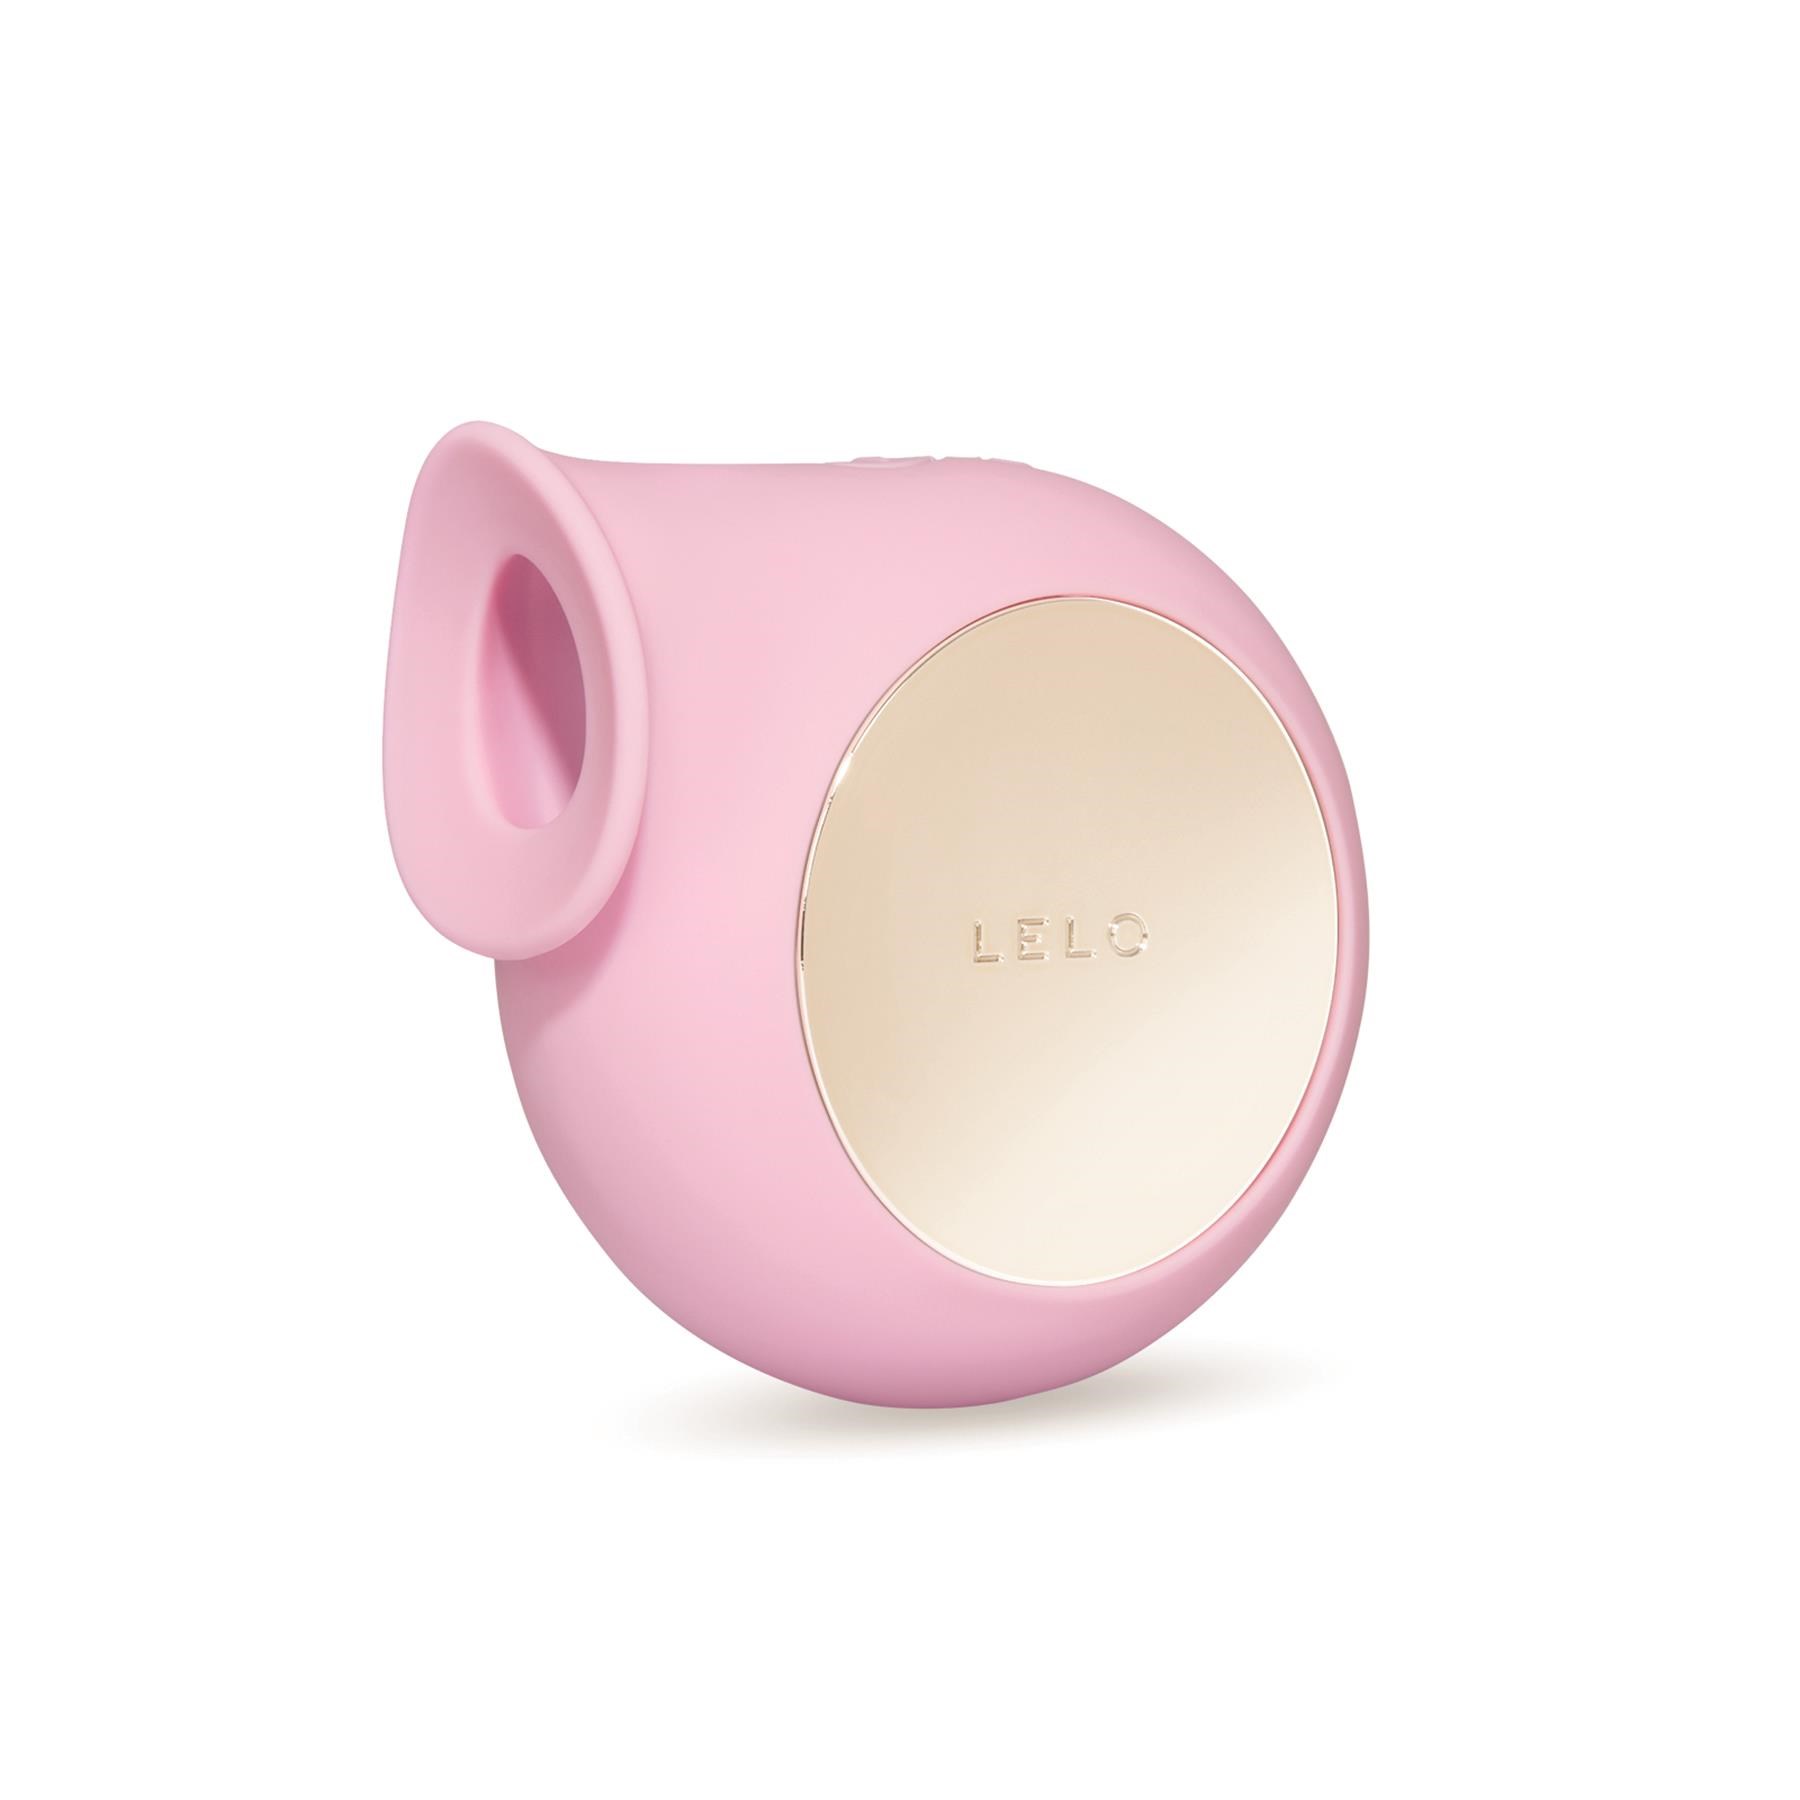 Lelo Sila Cruise Sonic Clitoral Massager - Product Shot #7